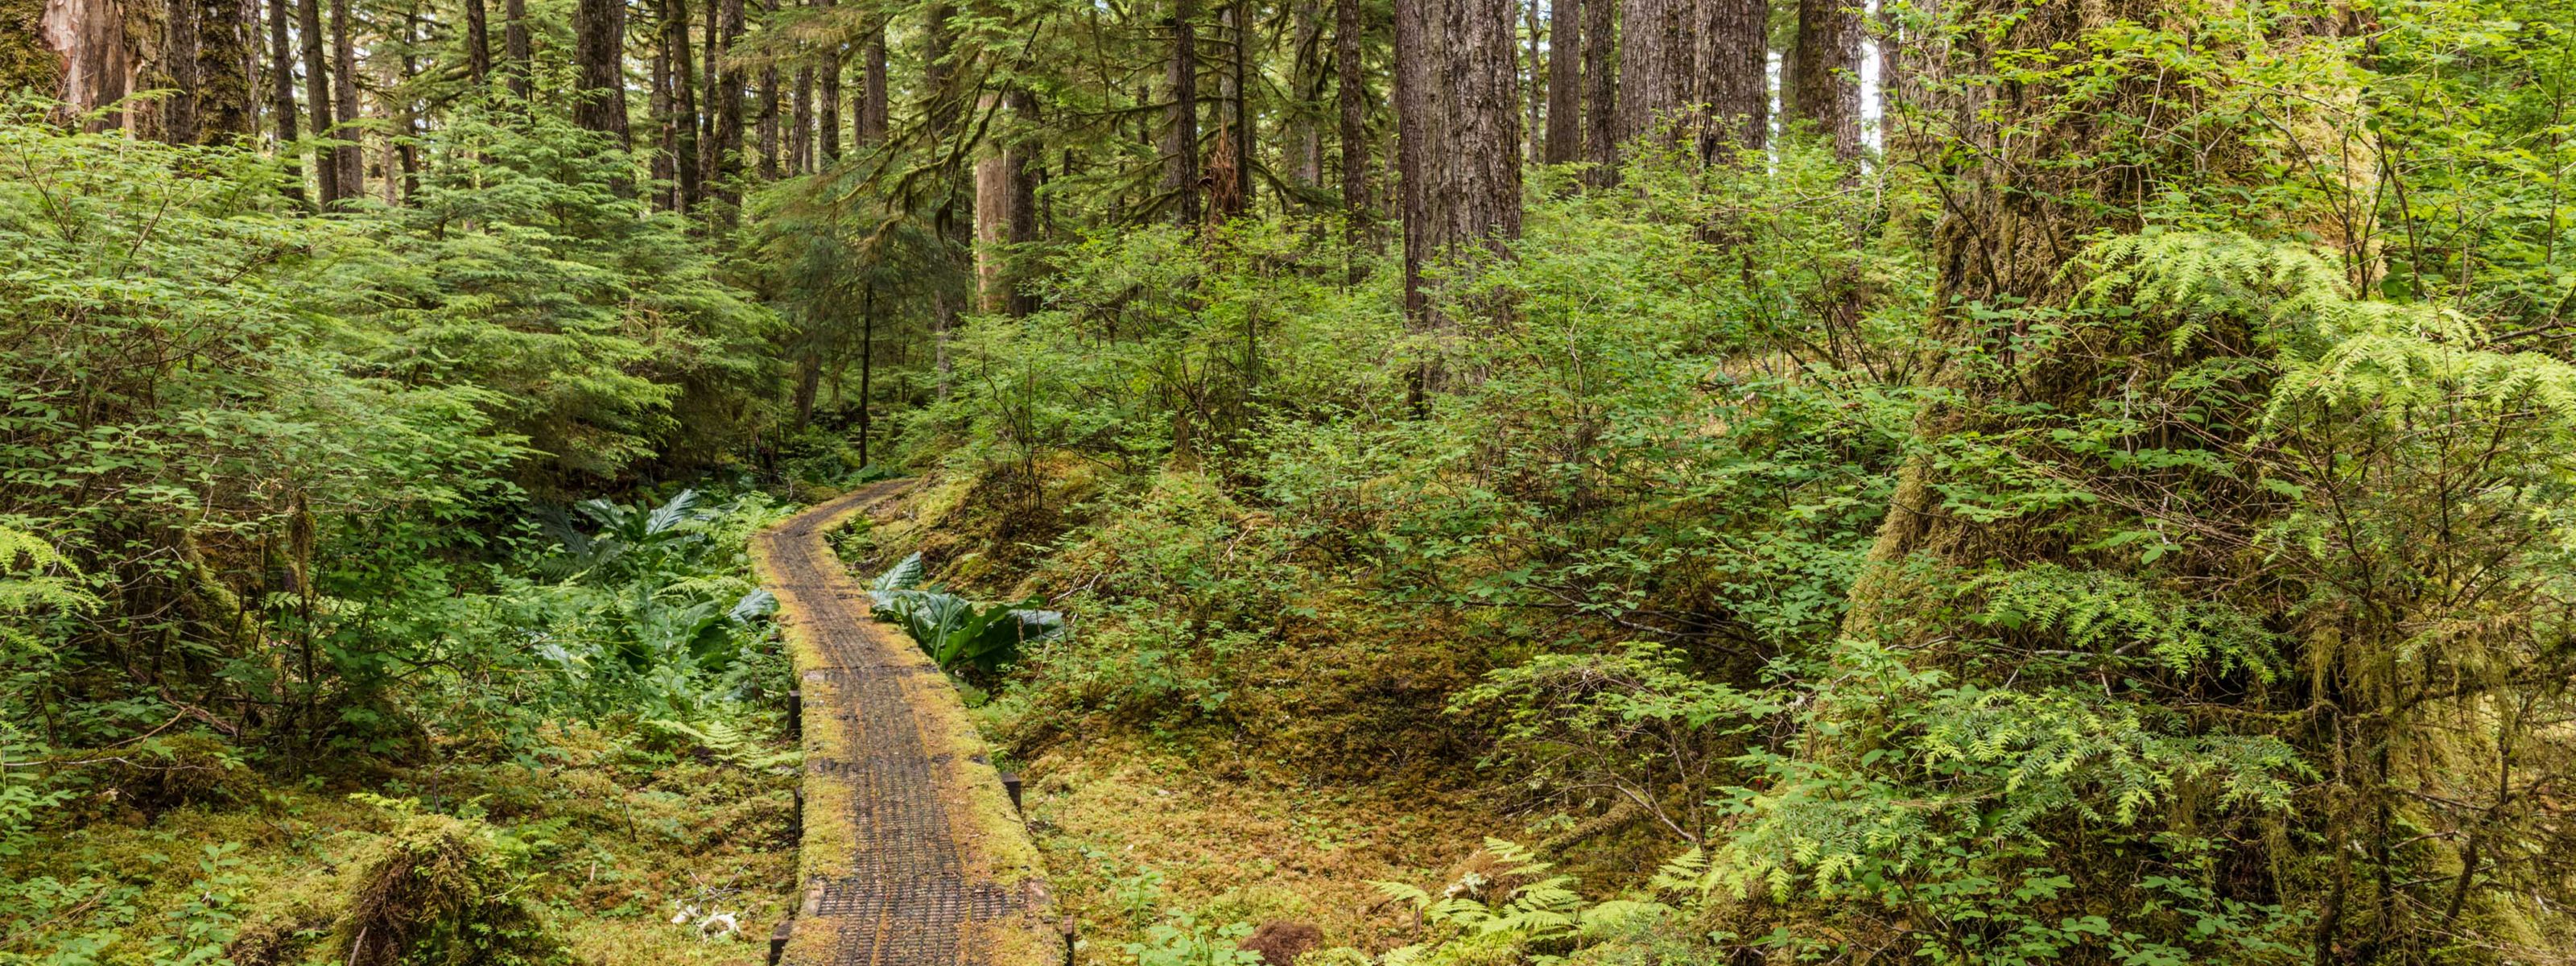 Moss-covered path through lush forest.